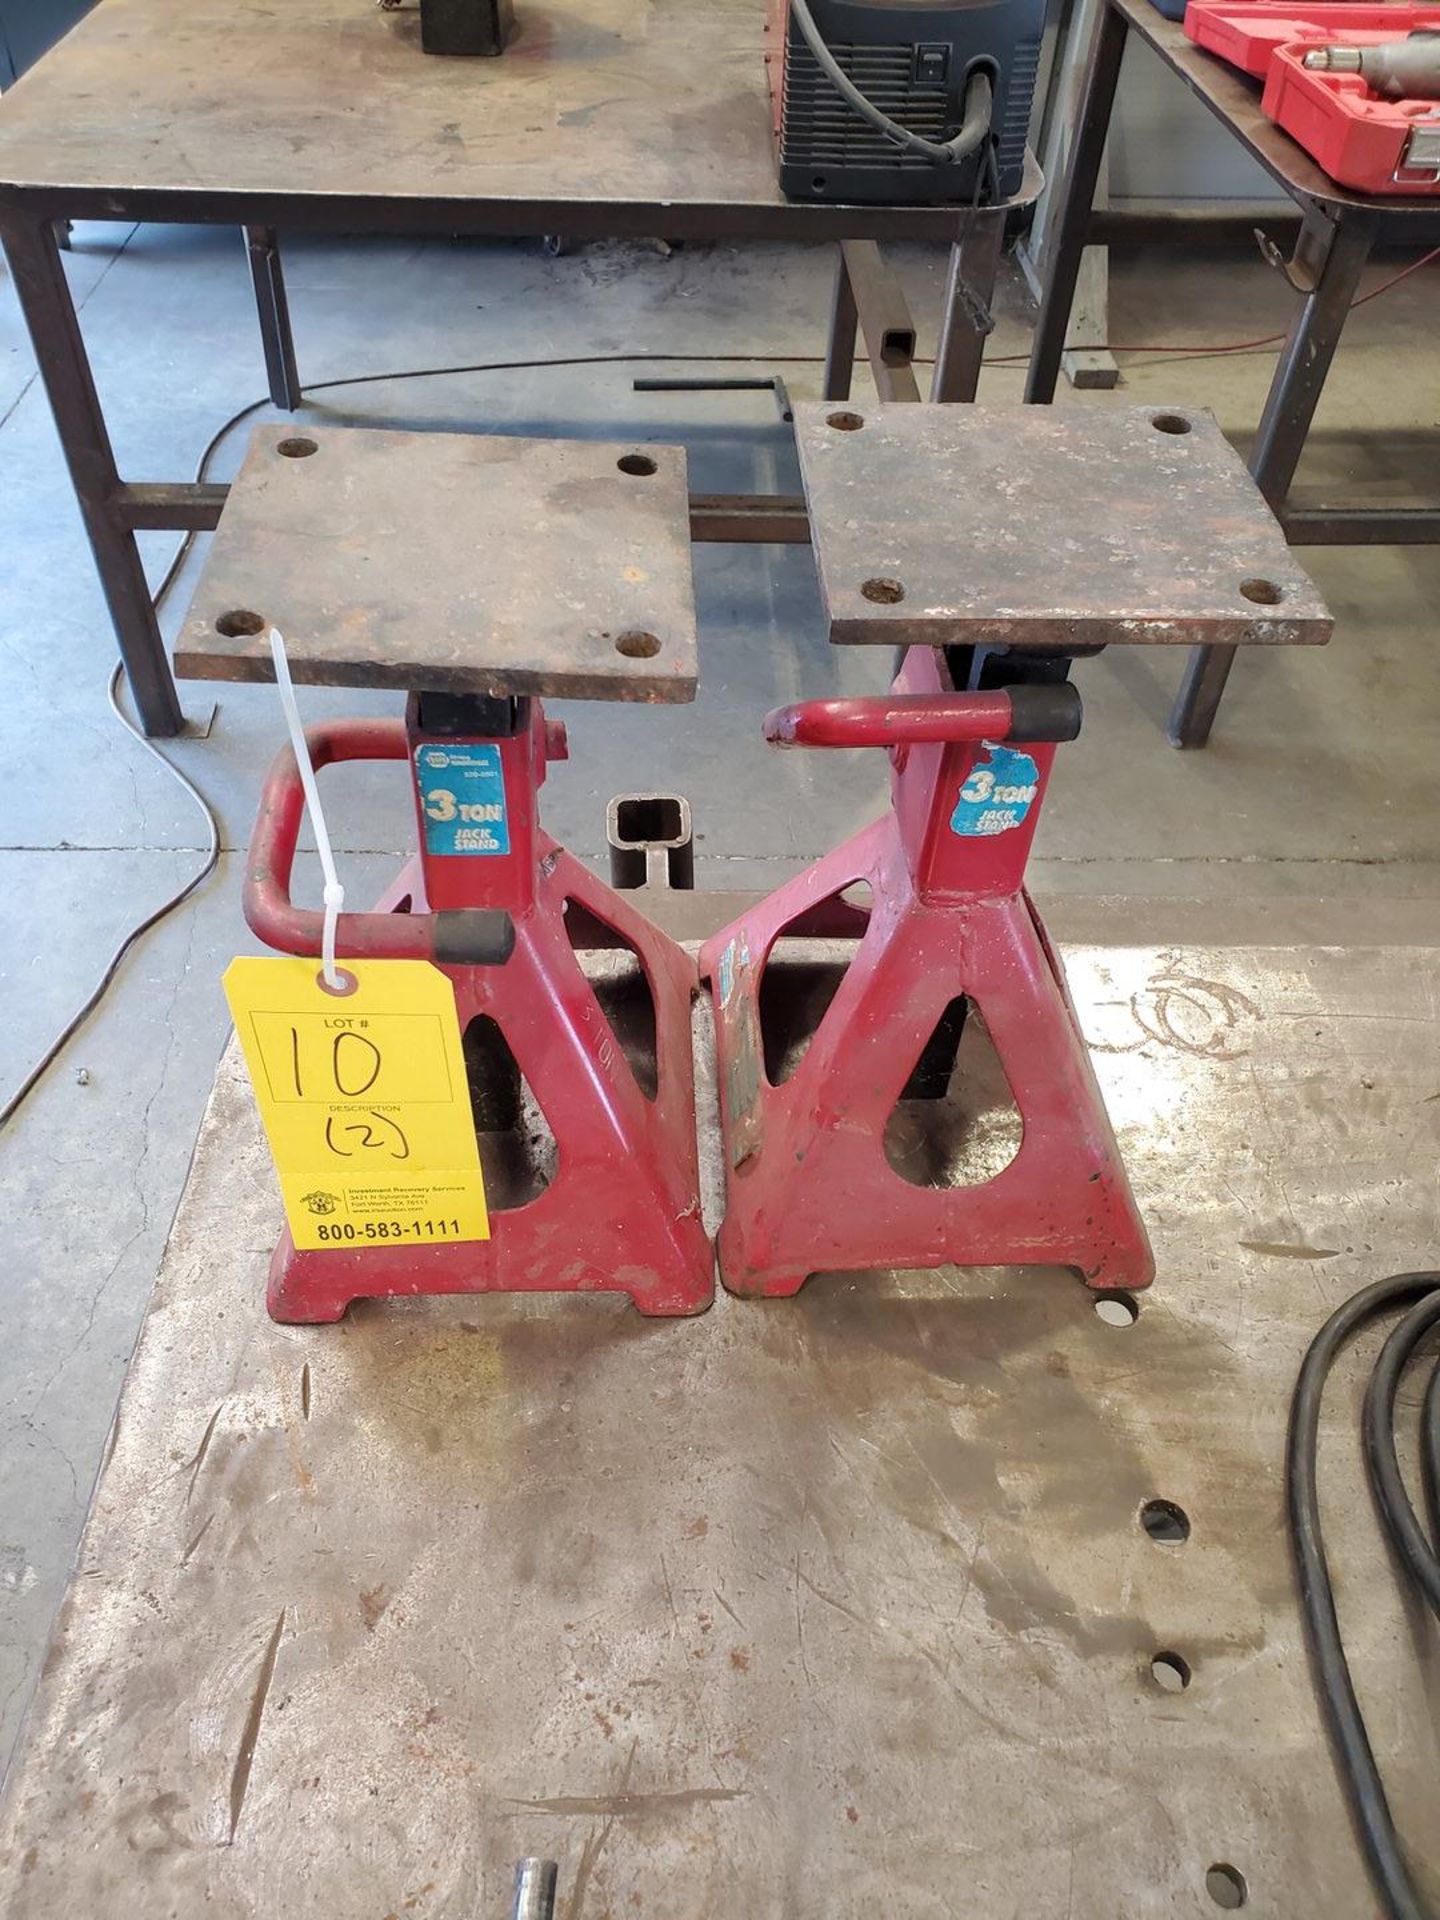 (2) 3Ton Jack Stands